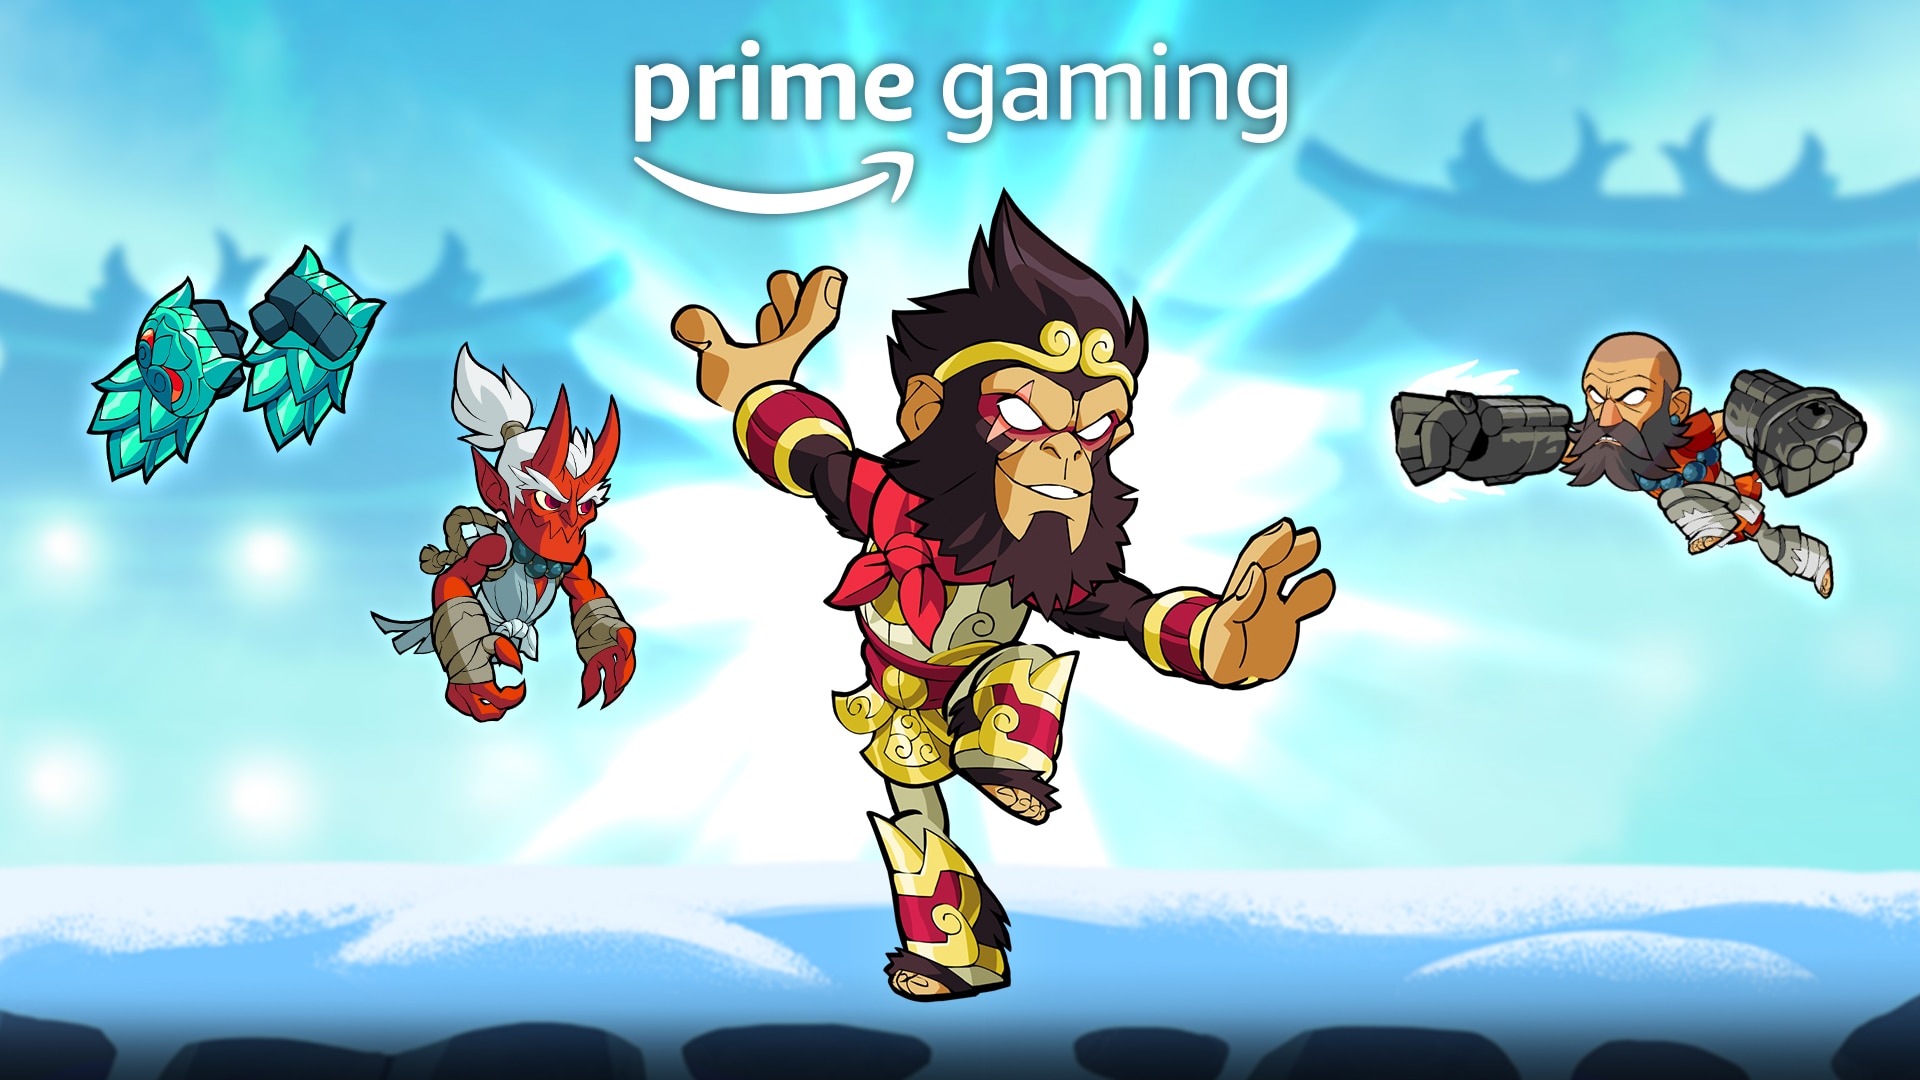 Get the Cosmic Bundle with Prime!